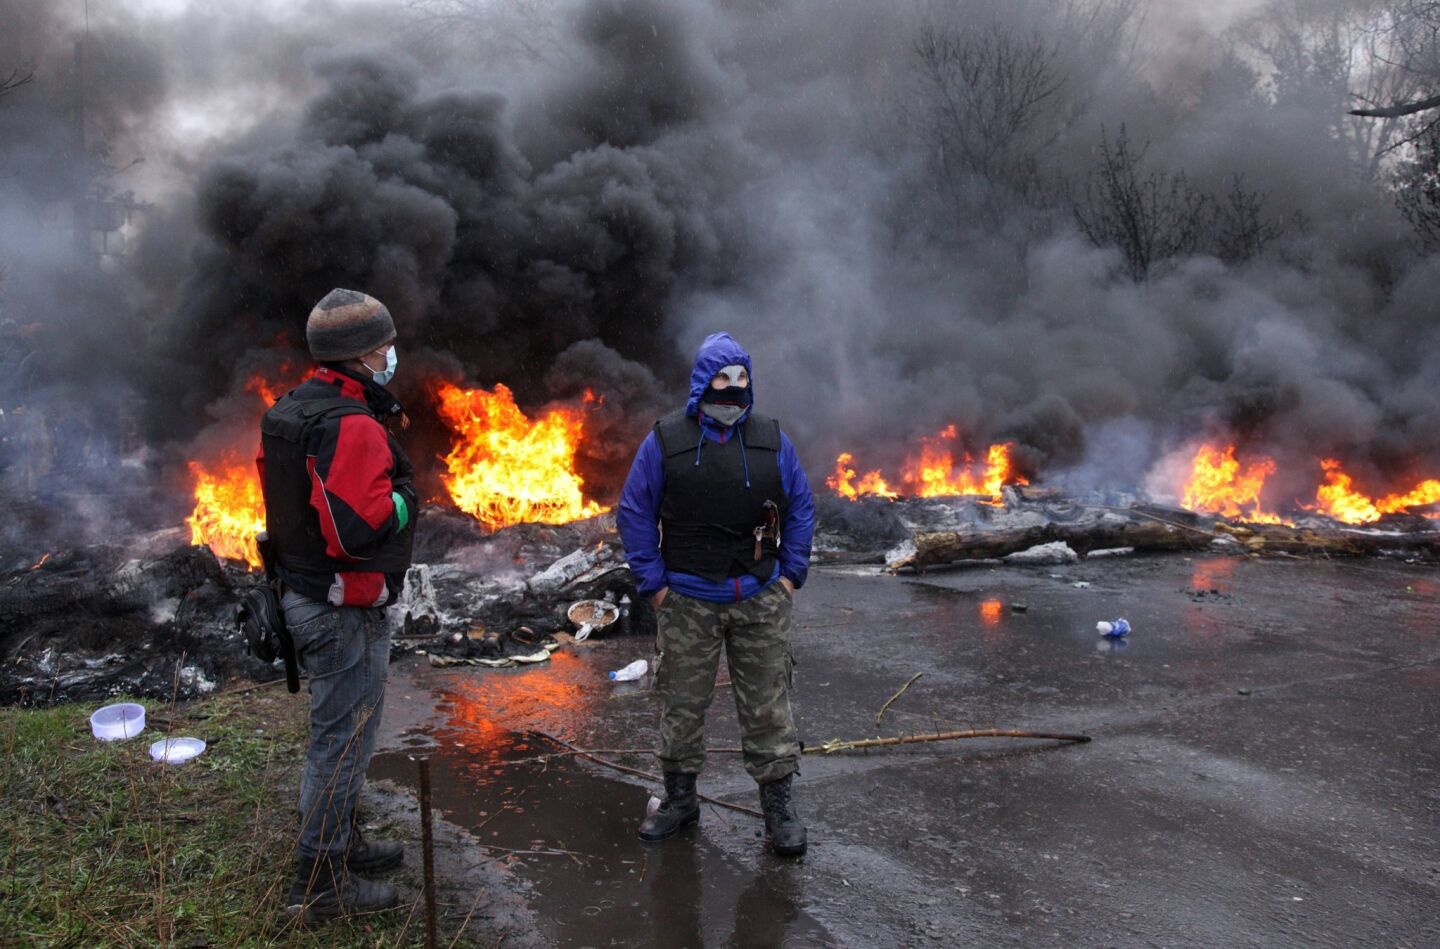 Pro-Russian protesters burn tires as they prepare for battle with Ukrainian special police forces on the outskirts of the eastern Ukrainian city of Slavyansk.